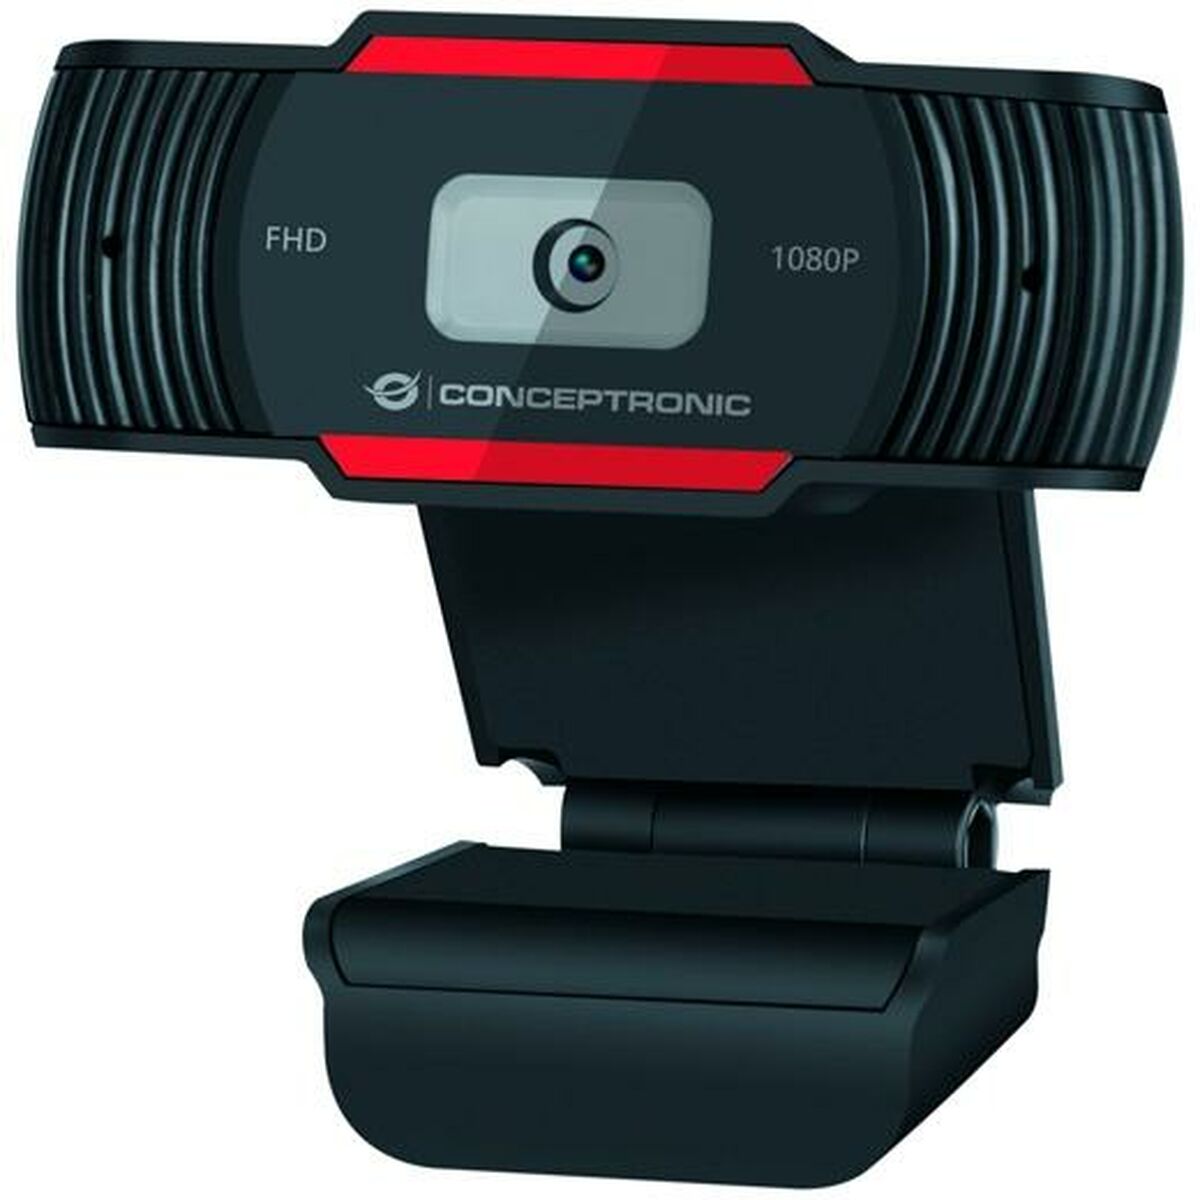 Webcam Conceptronic AMDIS 1080P FHD, Conceptronic, Computing, Accessories, webcam-conceptronic-amdis-1080p-fhd, :Full HD, :Webcam, Brand_Conceptronic, category-reference-2609, category-reference-2642, category-reference-2844, category-reference-t-19685, category-reference-t-19908, category-reference-t-21340, computers / peripherals, Condition_NEW, office, Price_20 - 50, Teleworking, RiotNook